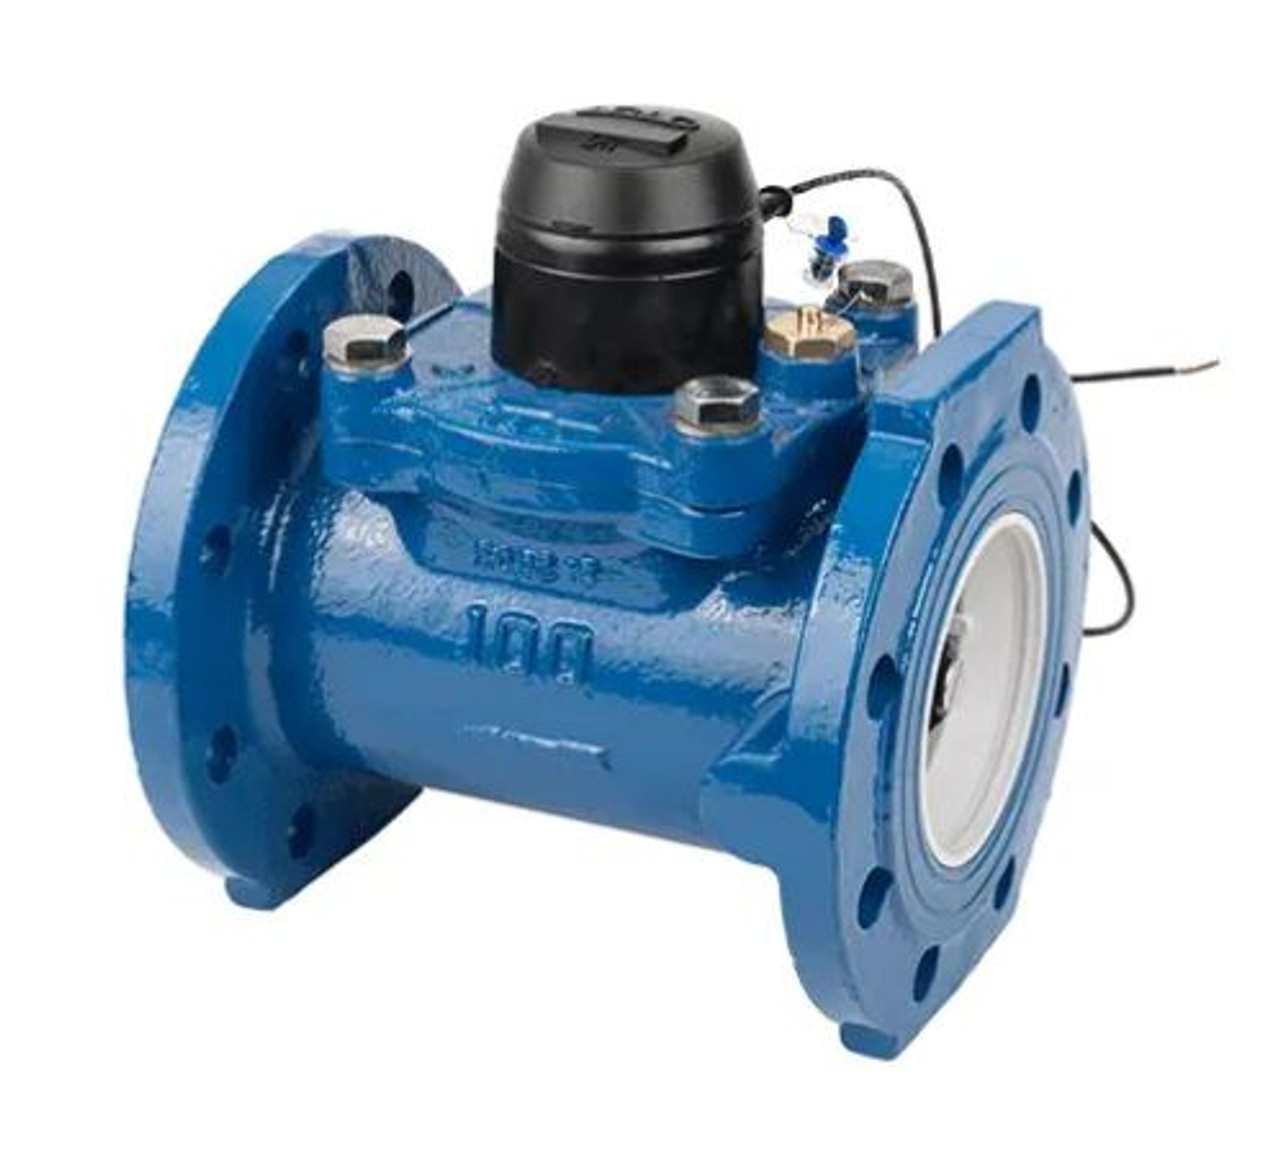 Arad WST 50mm flanged Meter with pulse output